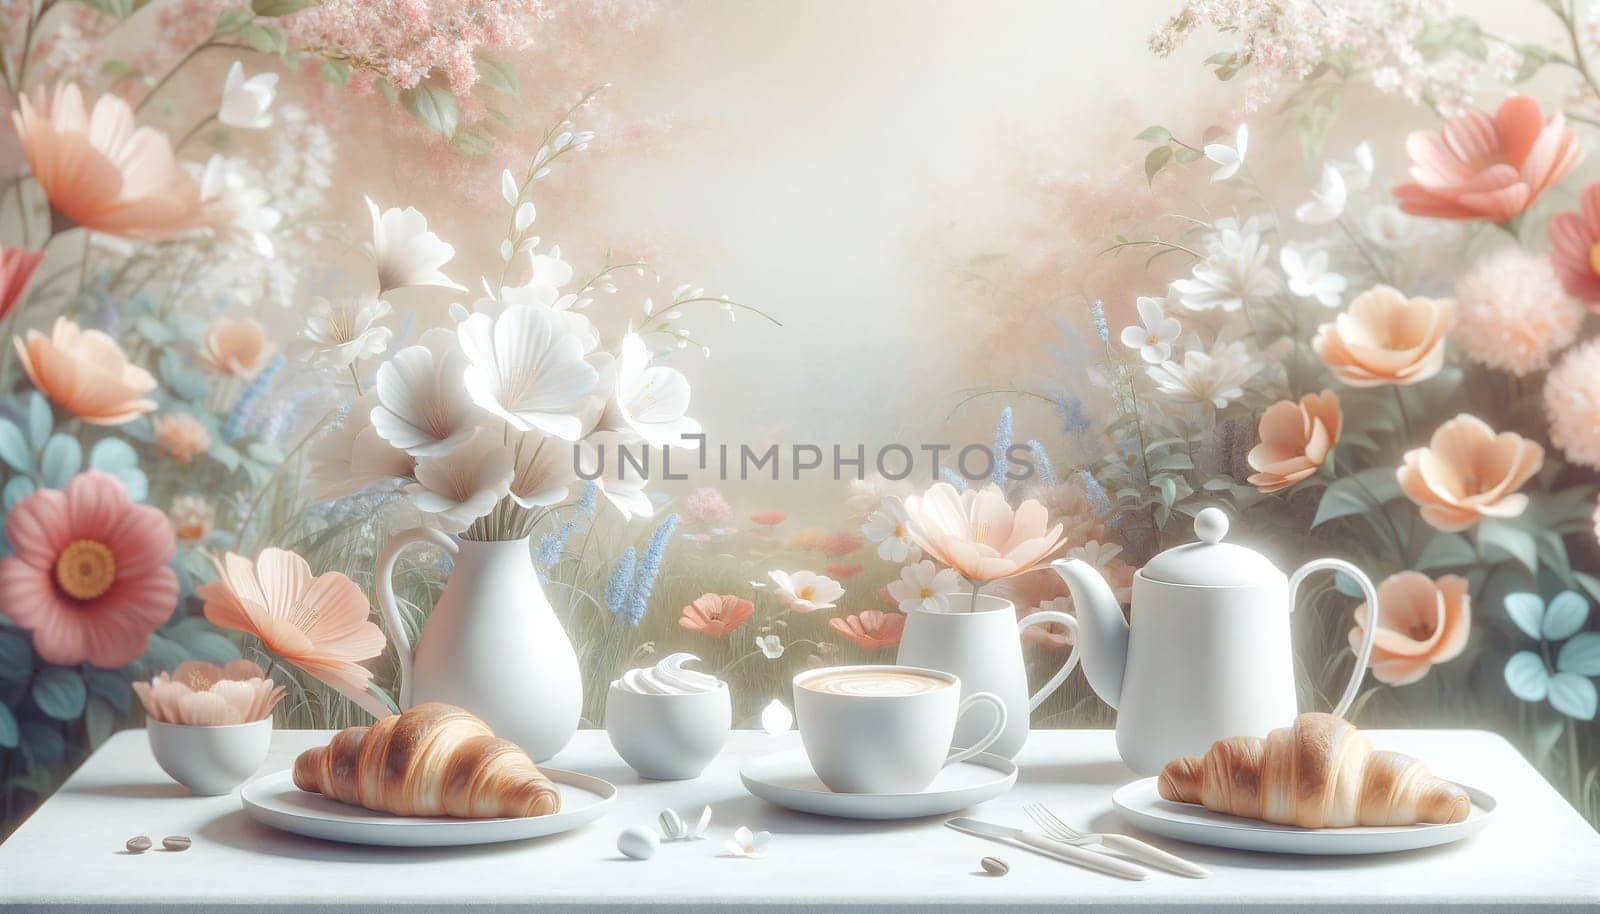 white cups with coffee and croissants on a white table in a blooming garden, still life in soft pastel colors.